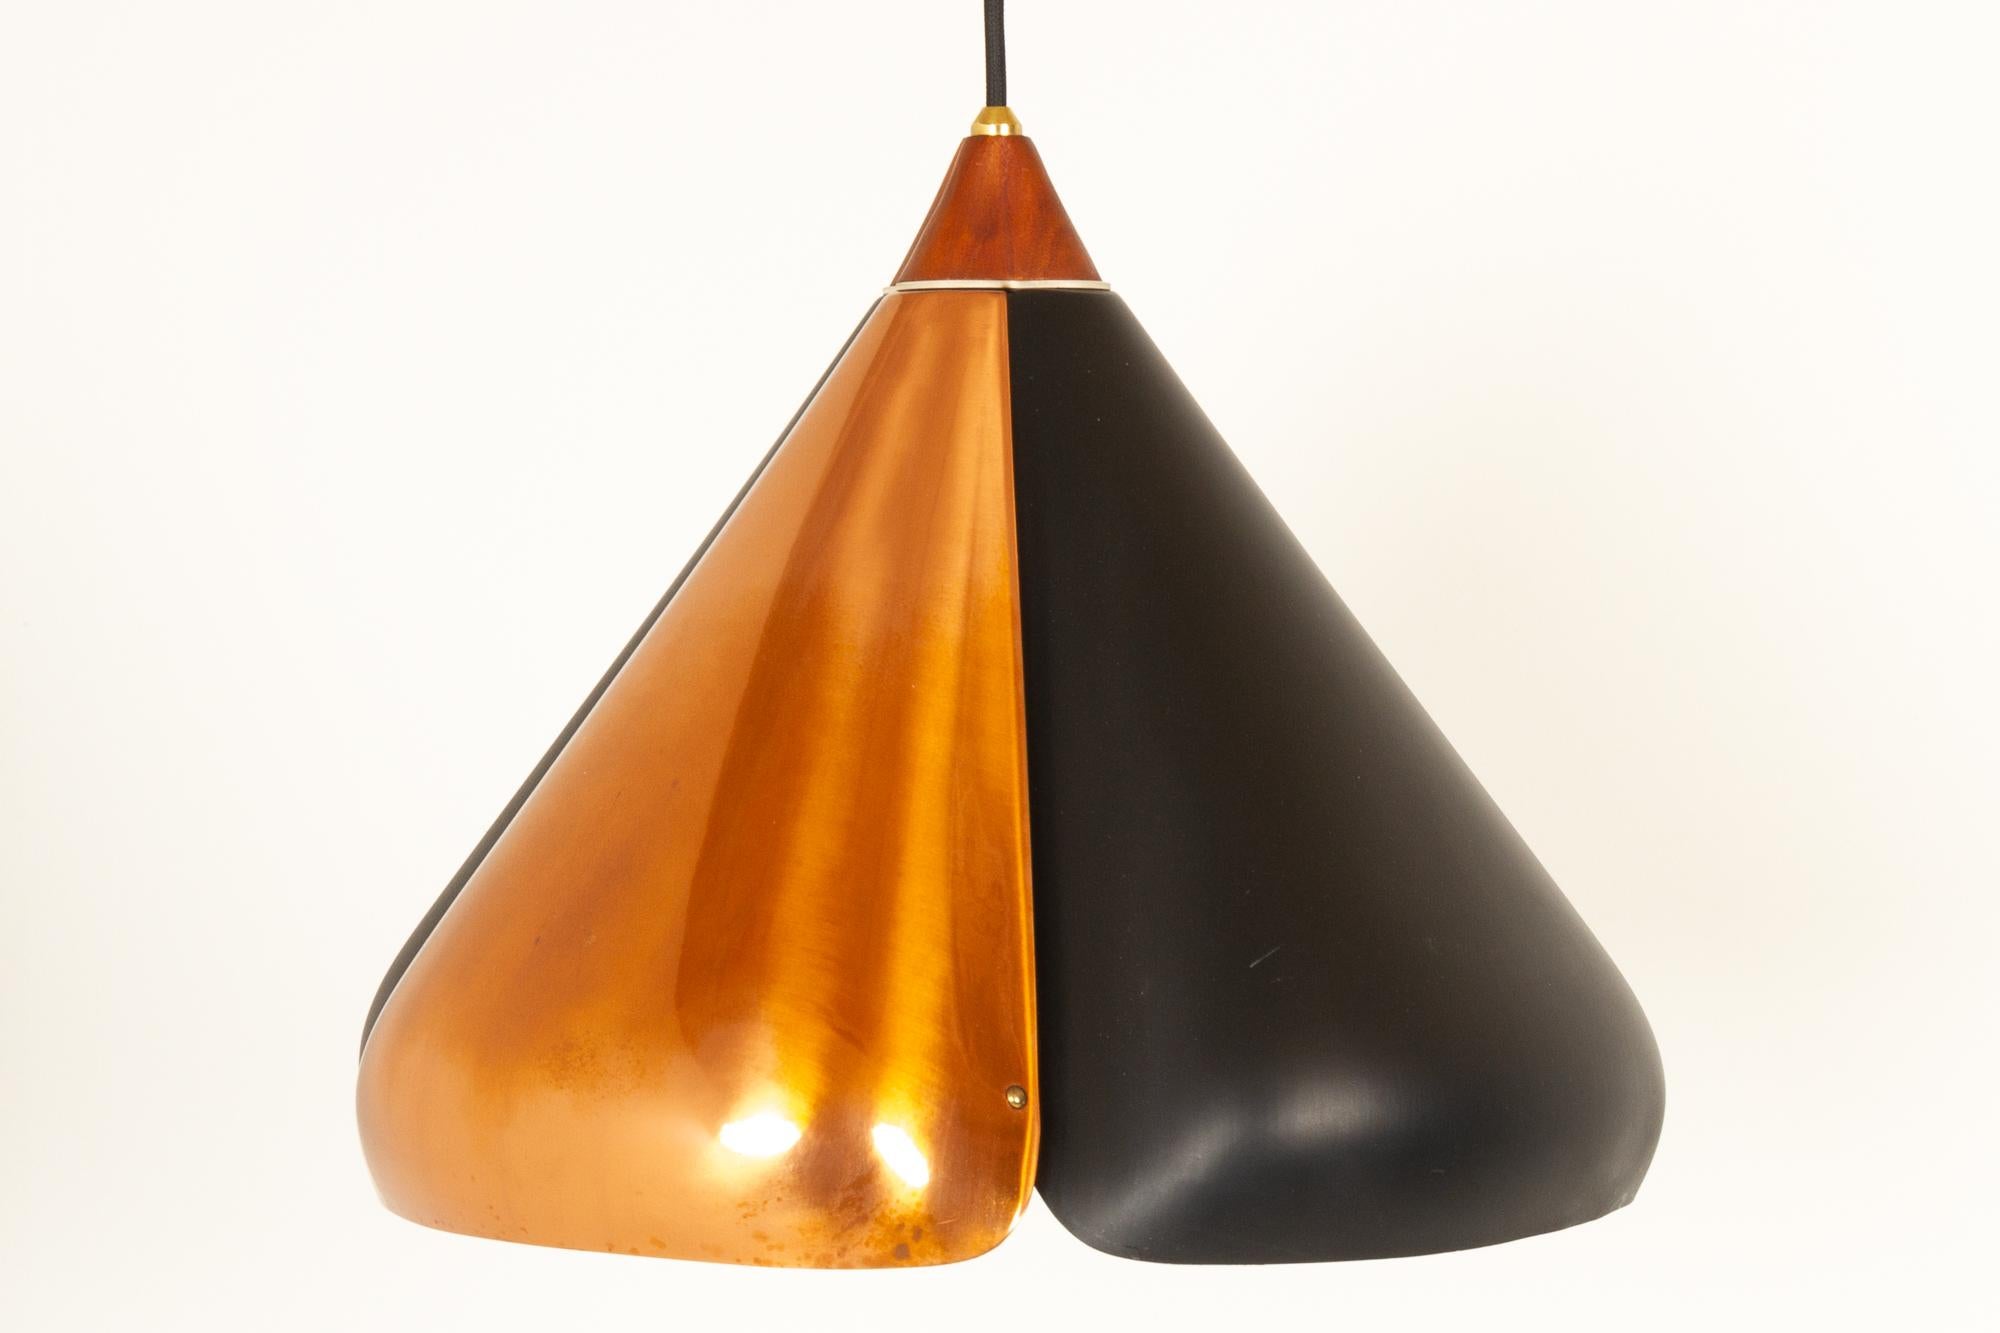 Midcentury Danish copper and black pendant 1960s
Vintage ceiling pendant lamp shaped as a four-leaf clover. Four shades connected by teak top. Fitted with a glass diffuser. 
Very good vintage condition. Fitted with new fabric wire. Only few signs